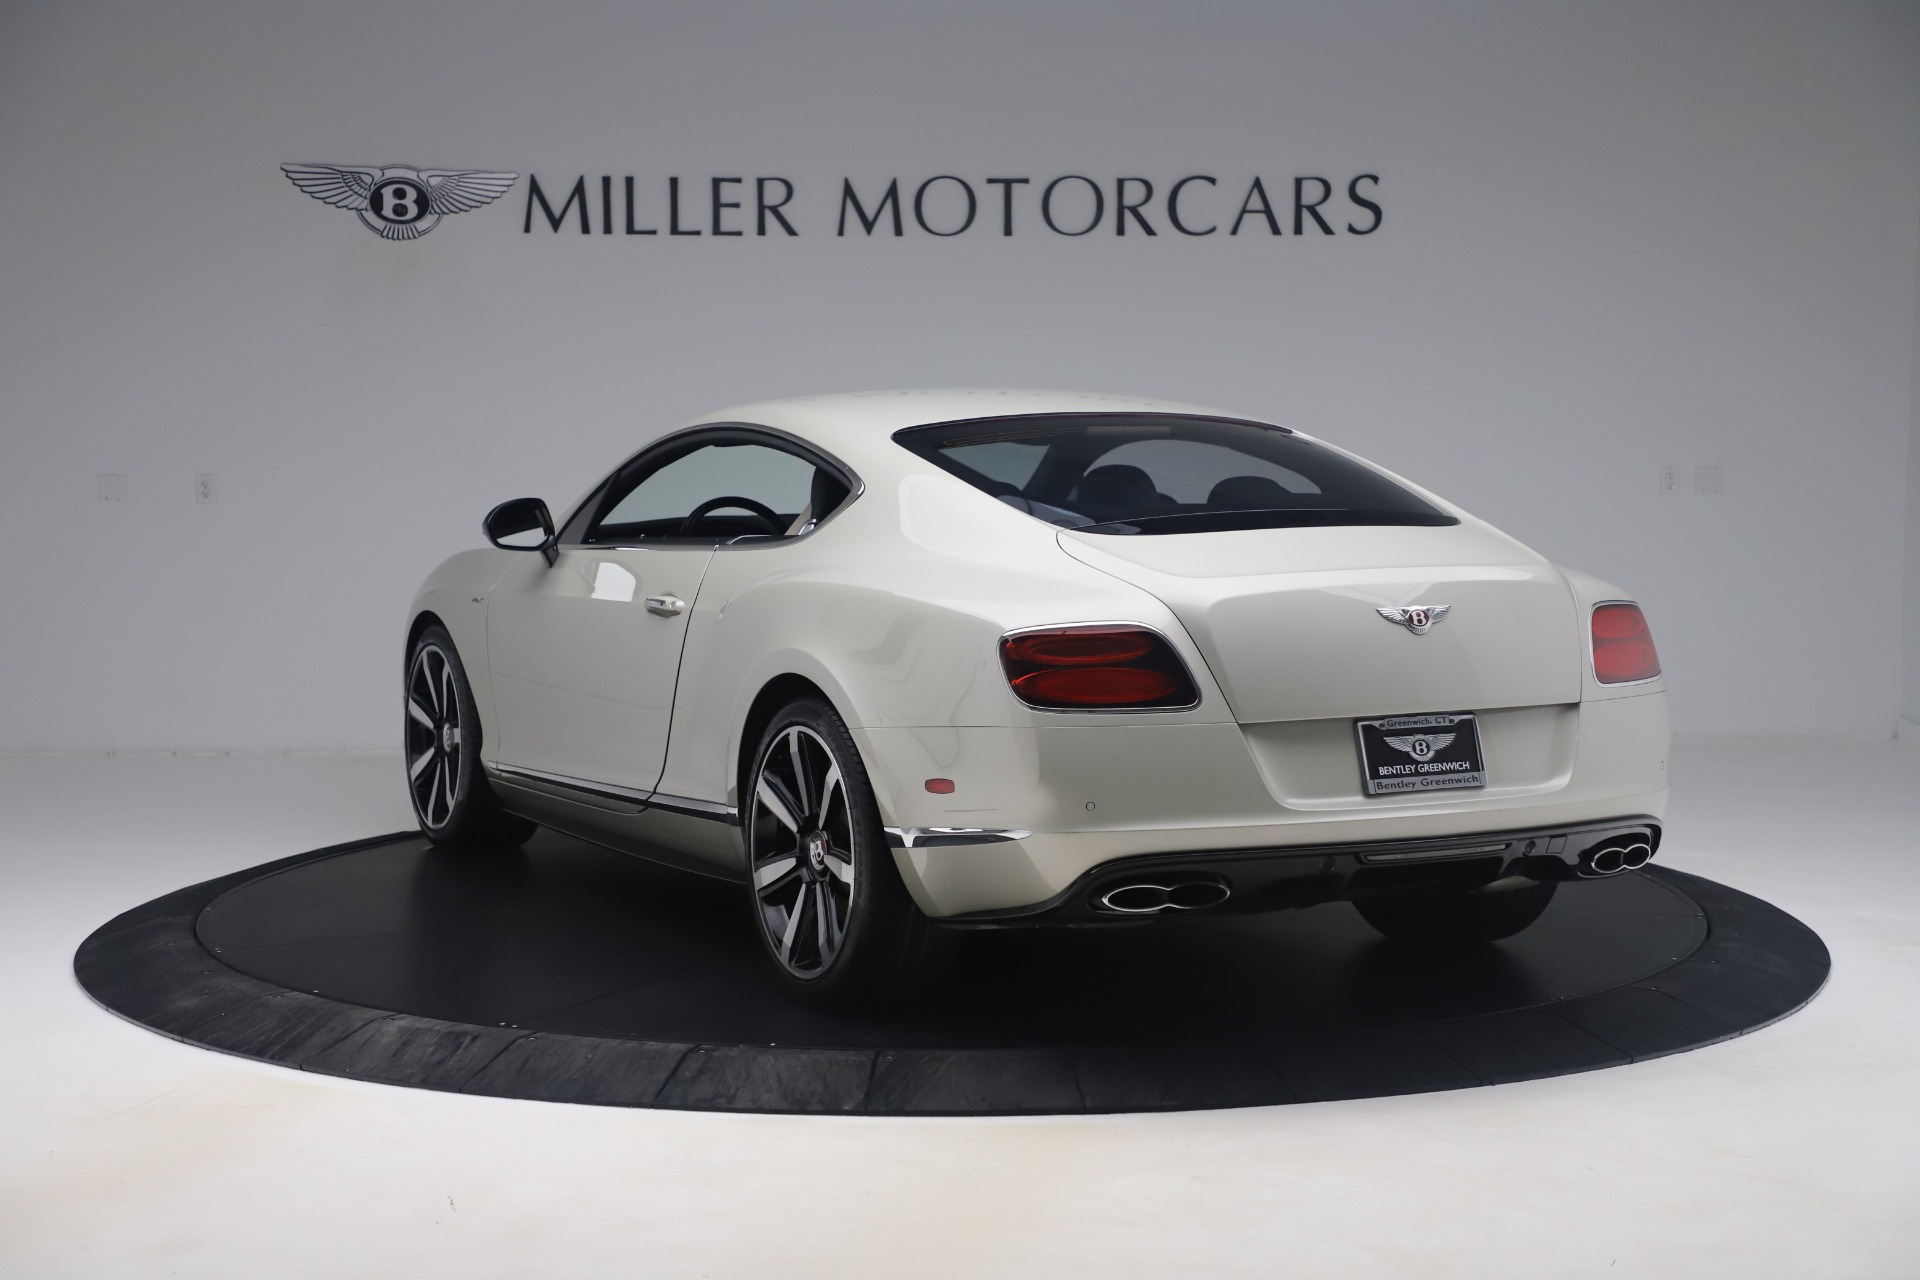 Pre Owned 14 Bentley Continental Gt V8 S For Sale Miller Motorcars Stock 7680